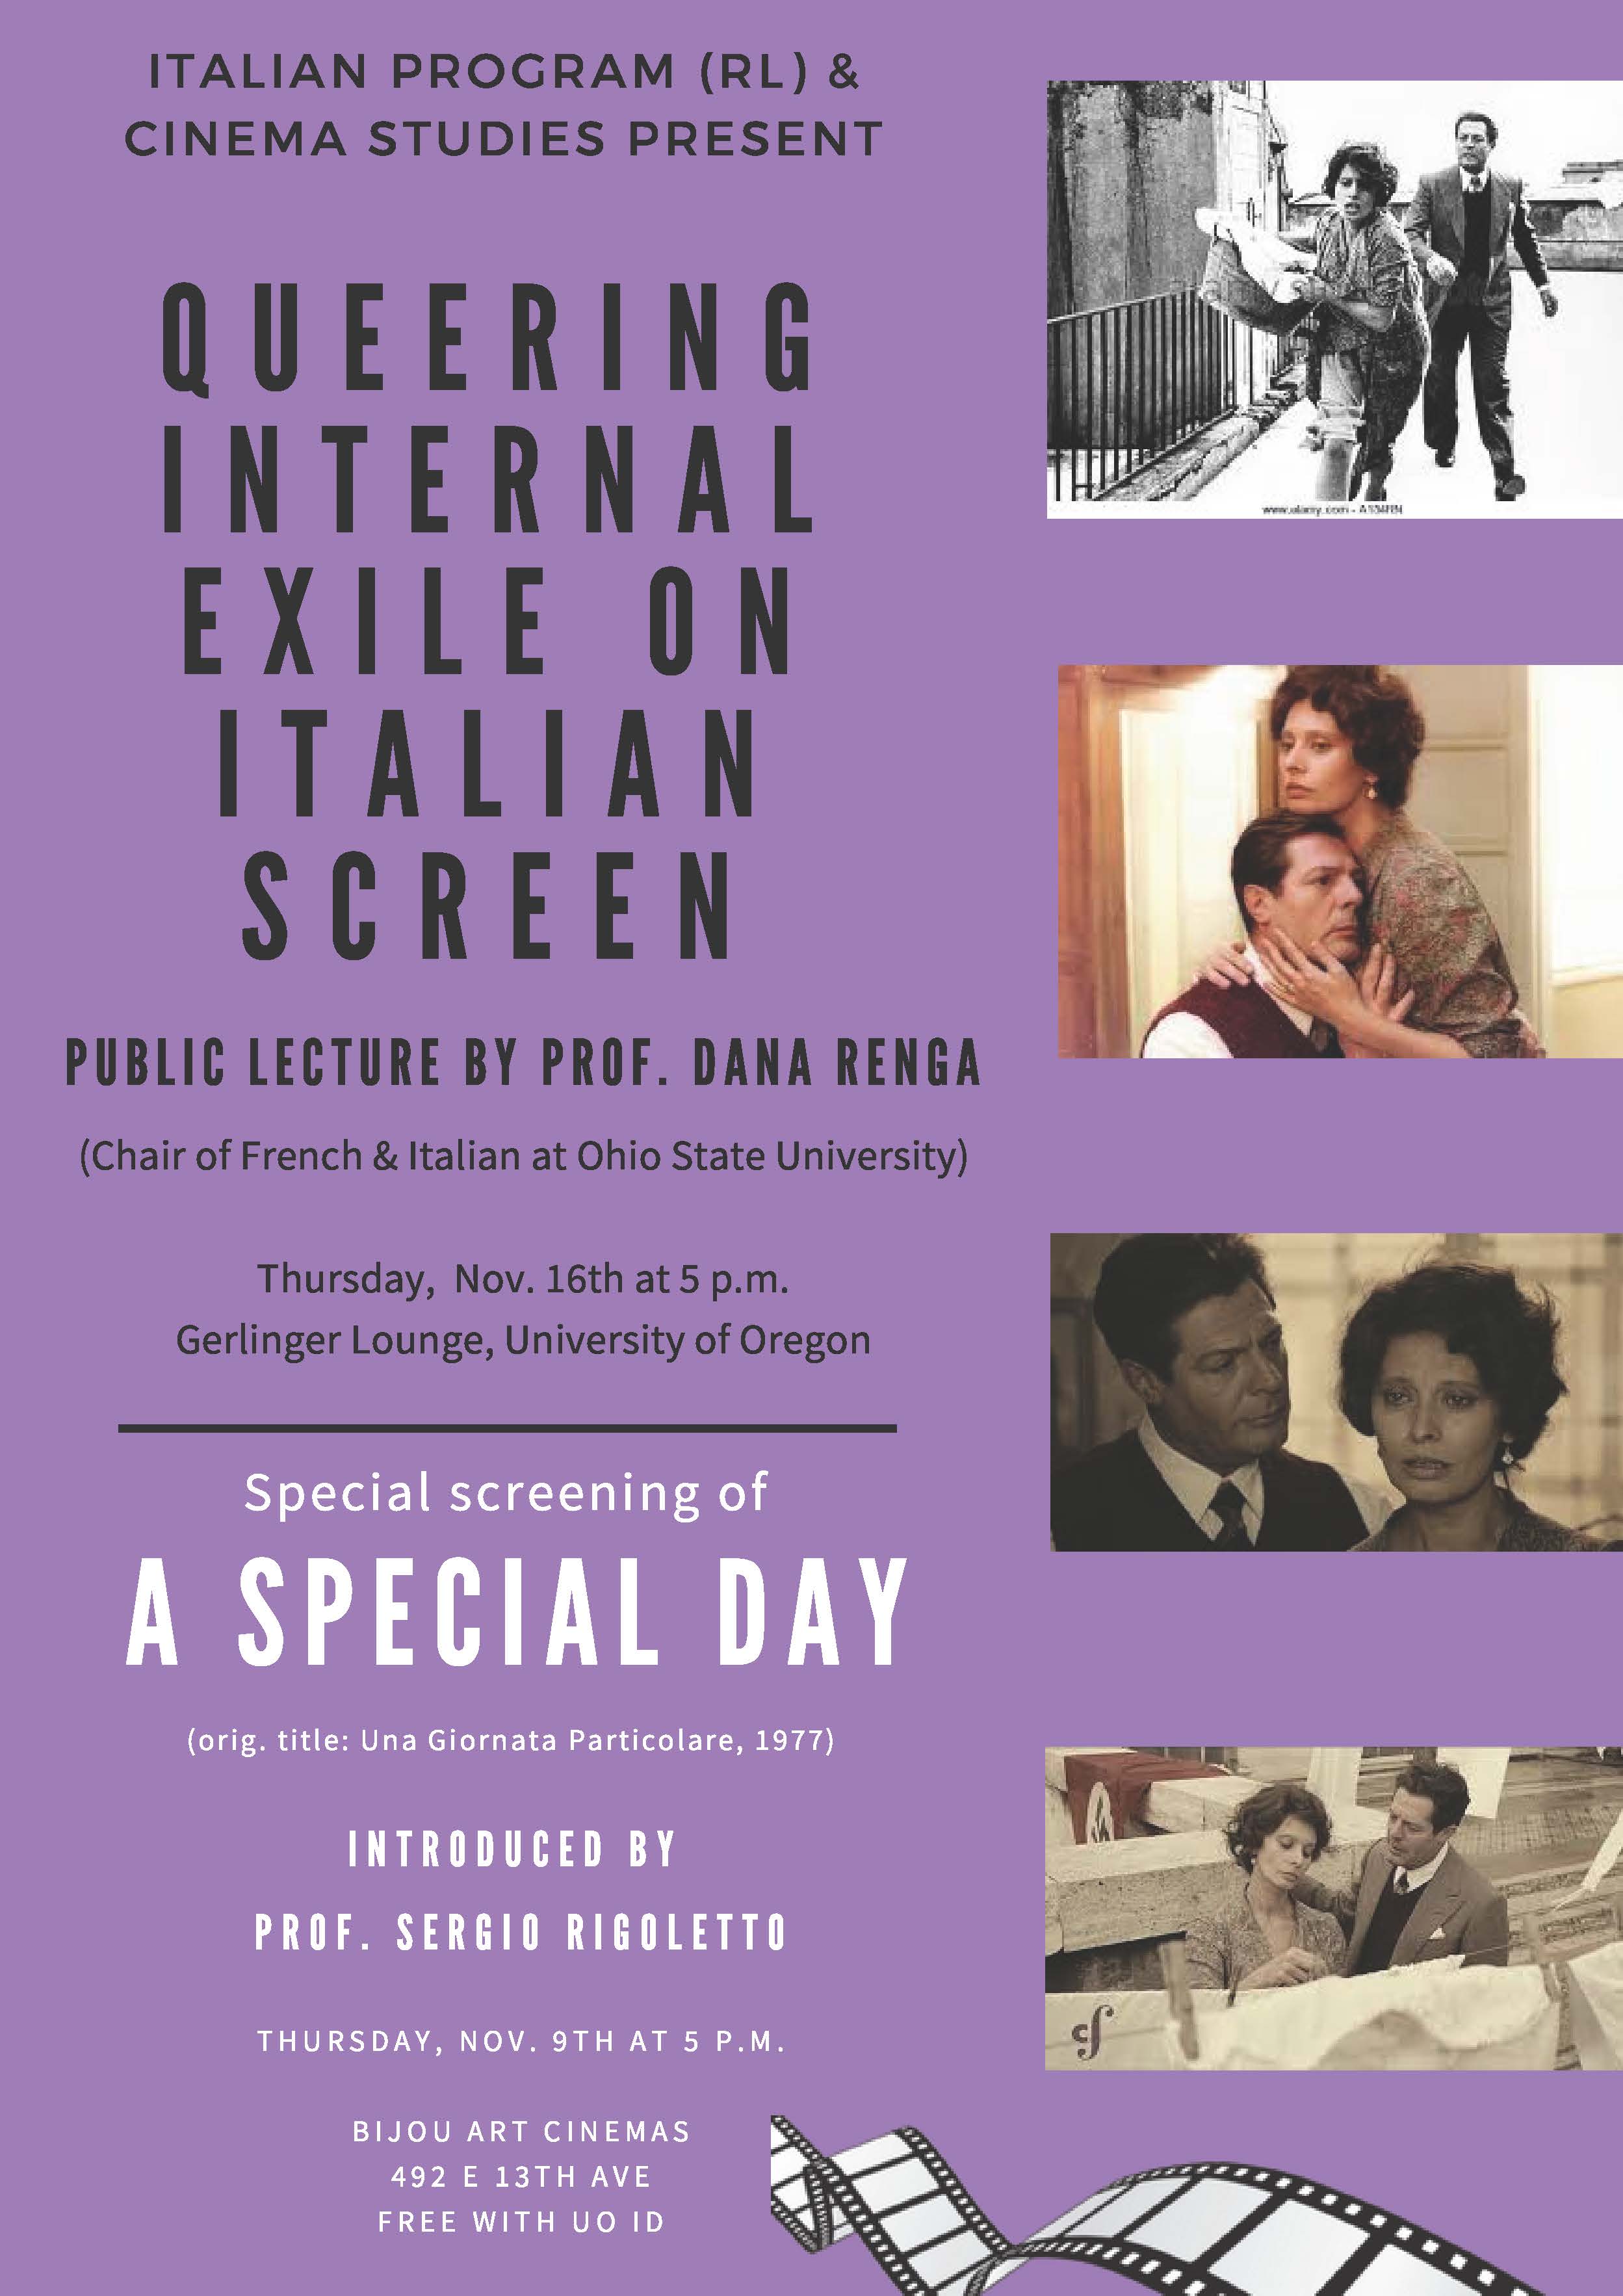 Poster for screening of A Special Day